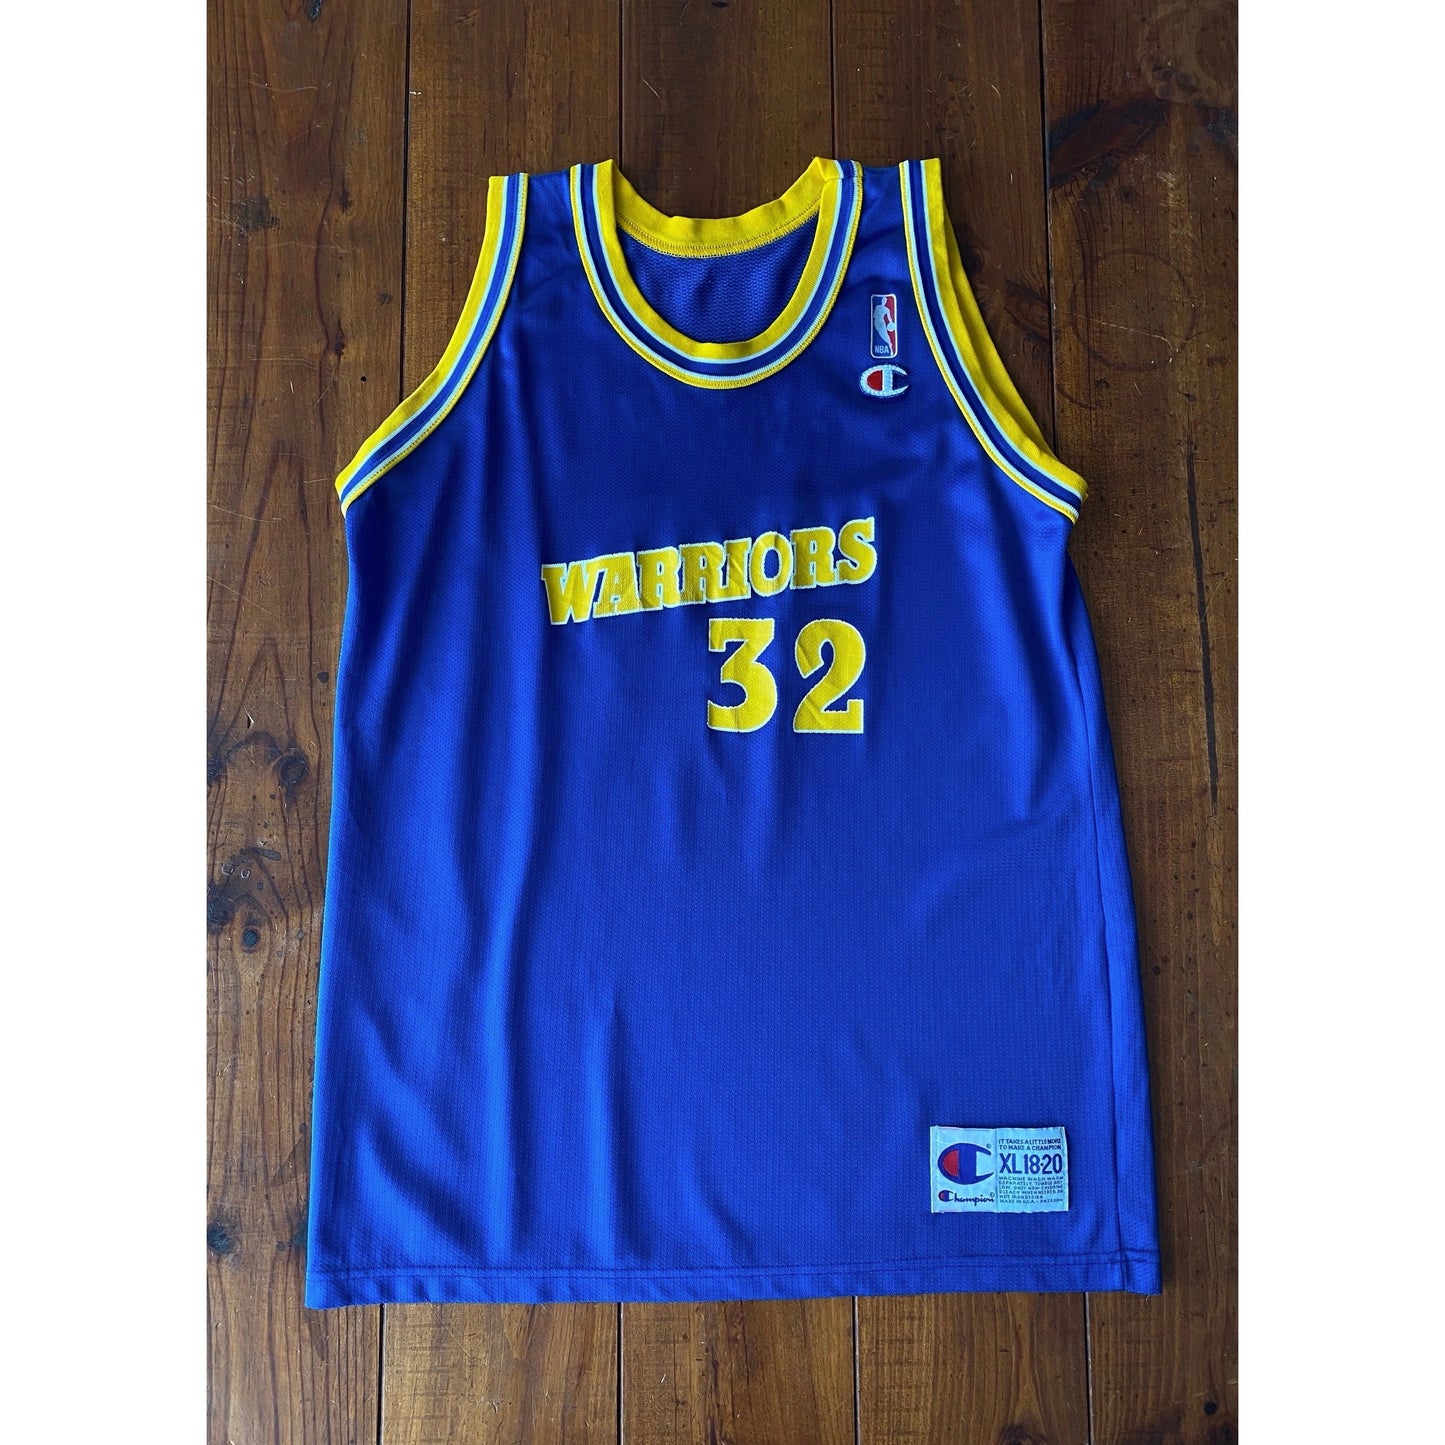 Youth 18-20. Vintage 90s Champion NBA Warriors #32 Smith jersey  Made In USA